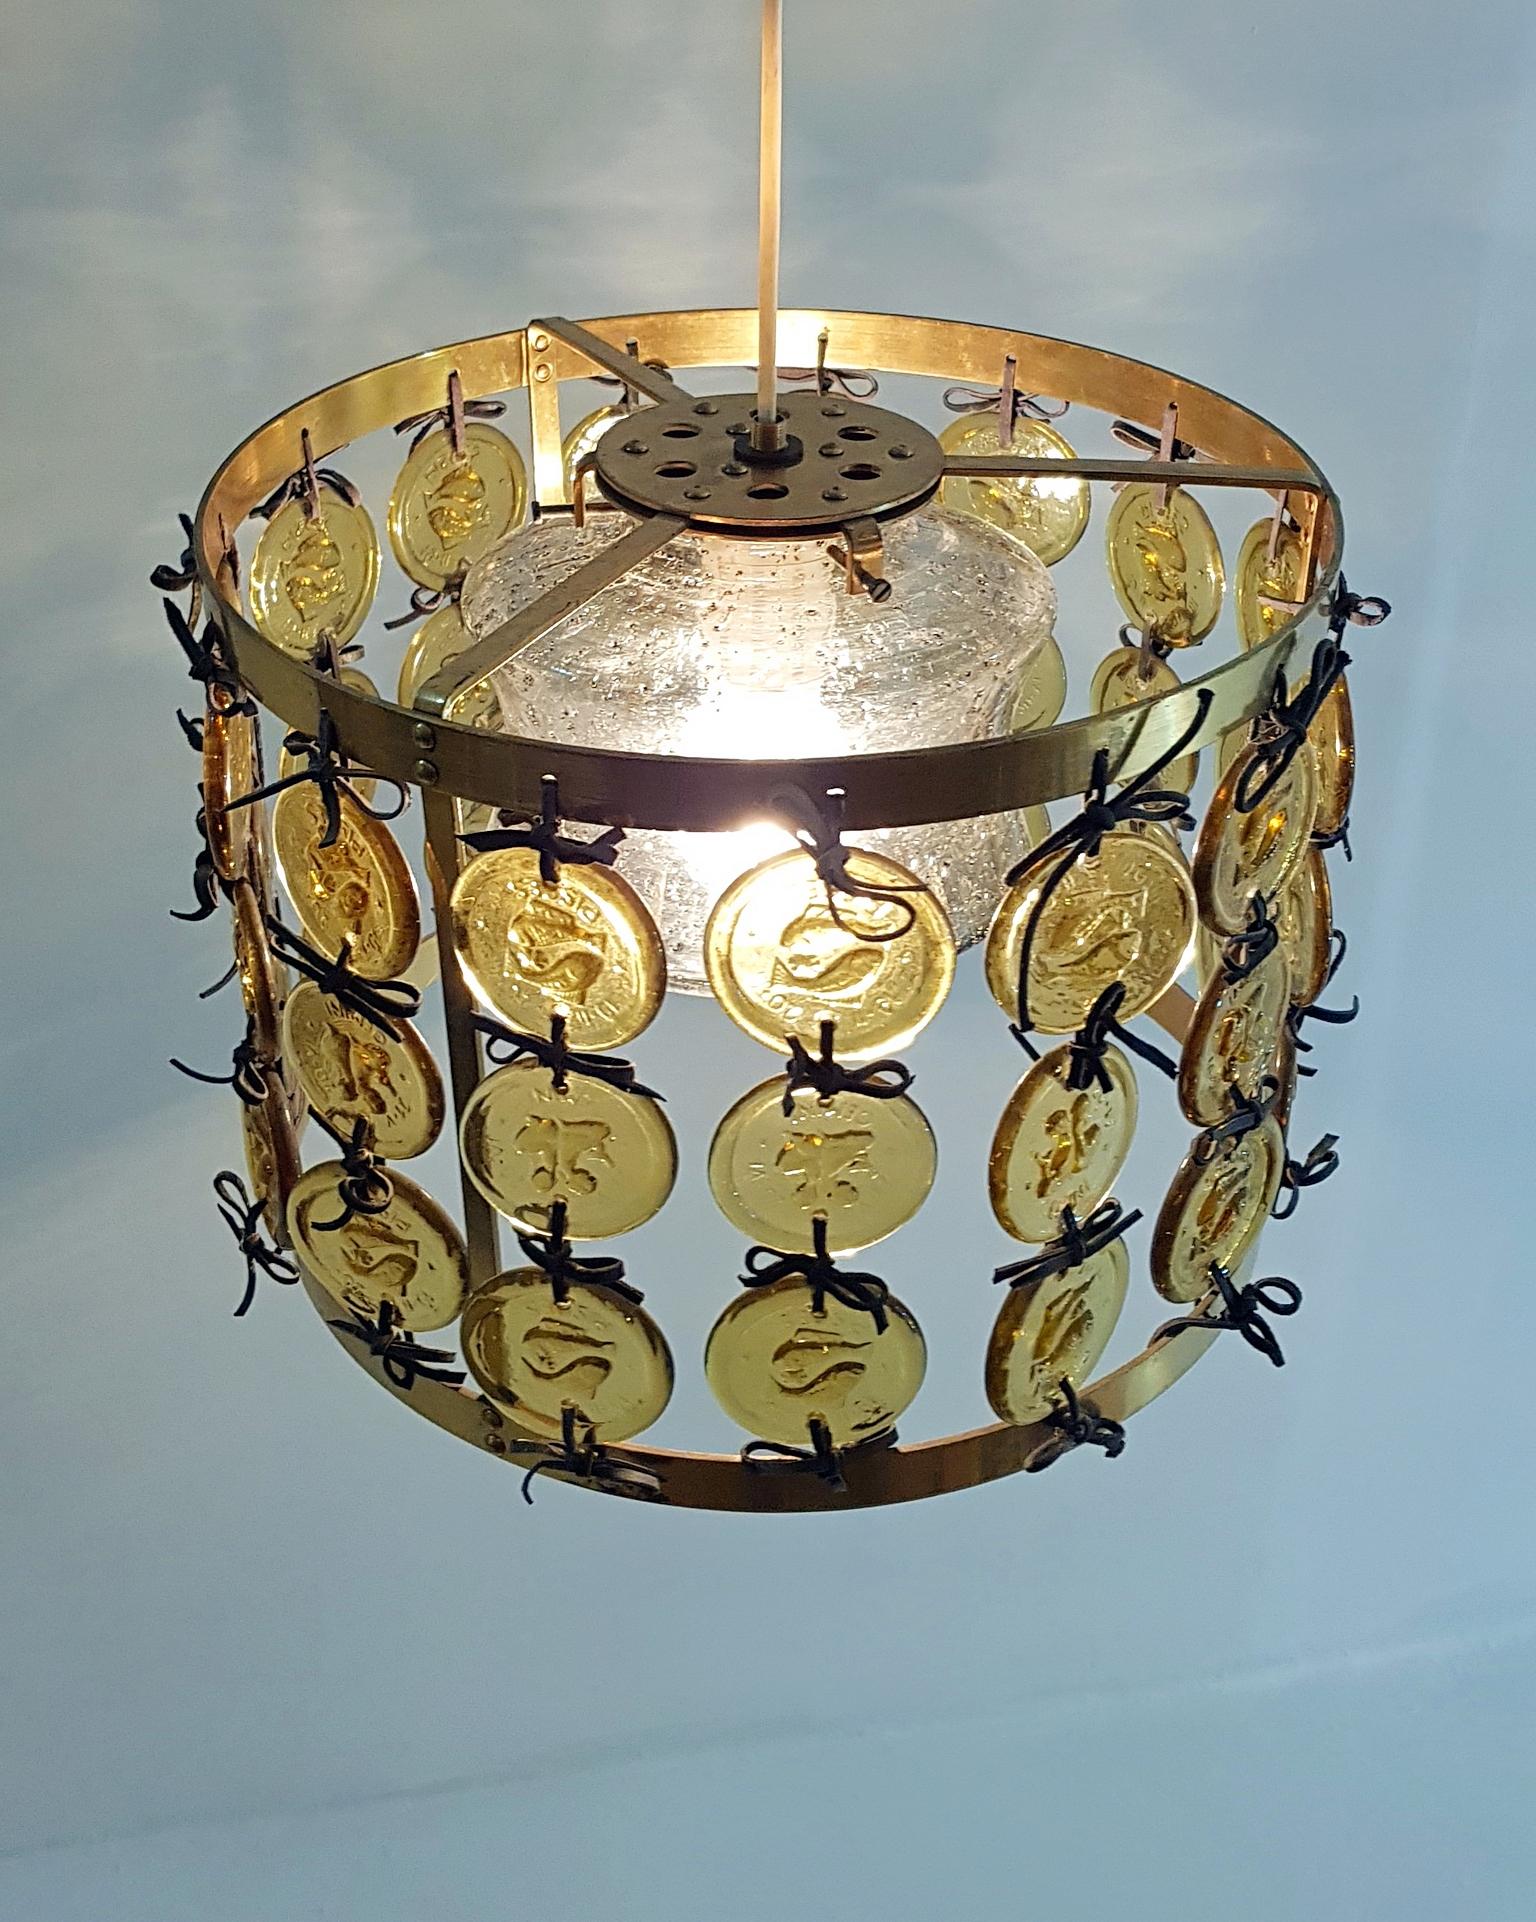 Rare celling lamp by Swedish designer Erik Höglund for glass maker Kosta Boda Glassmanufacturers. The frame is made in brass with attached round pieces of glass depicting the star signs Pisces and Gemini bound together in black leather strings. In